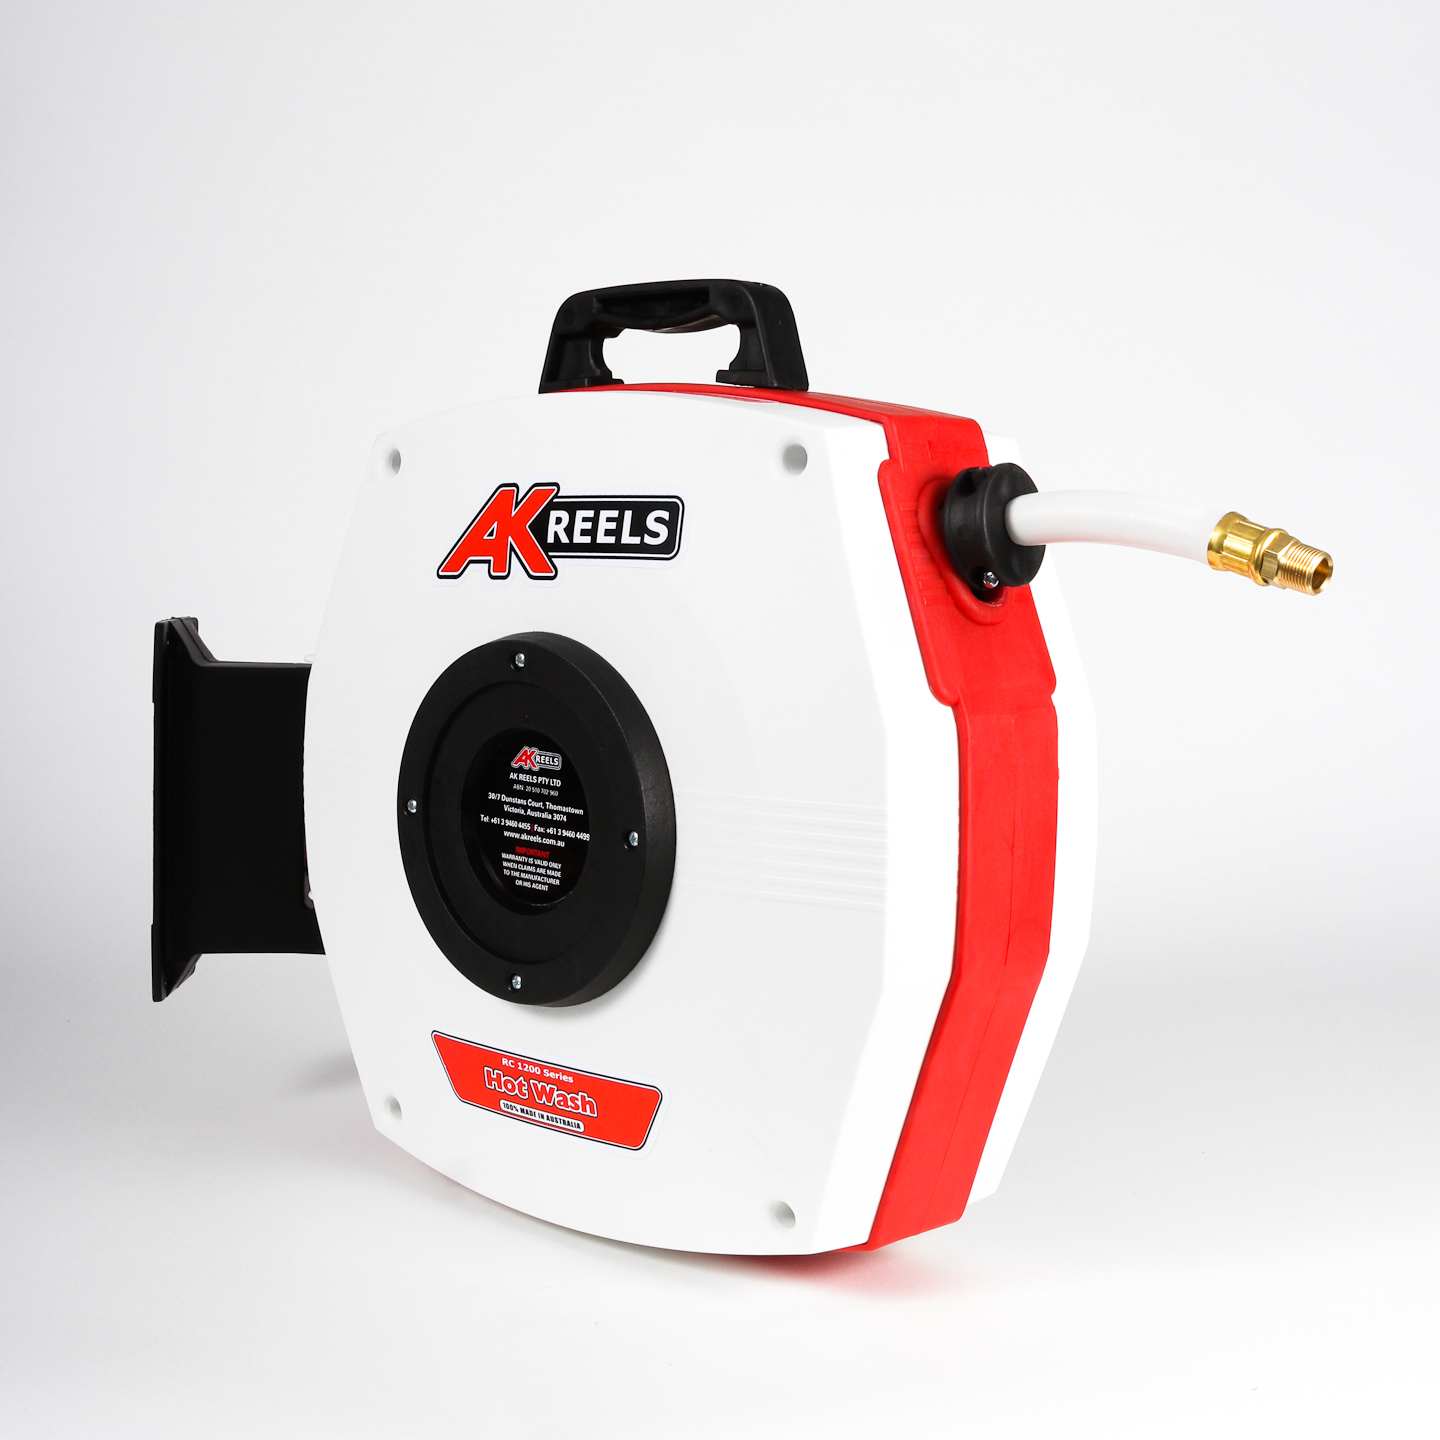 RC1200K Hot Water Hose Reel - The Australian Made Campaign